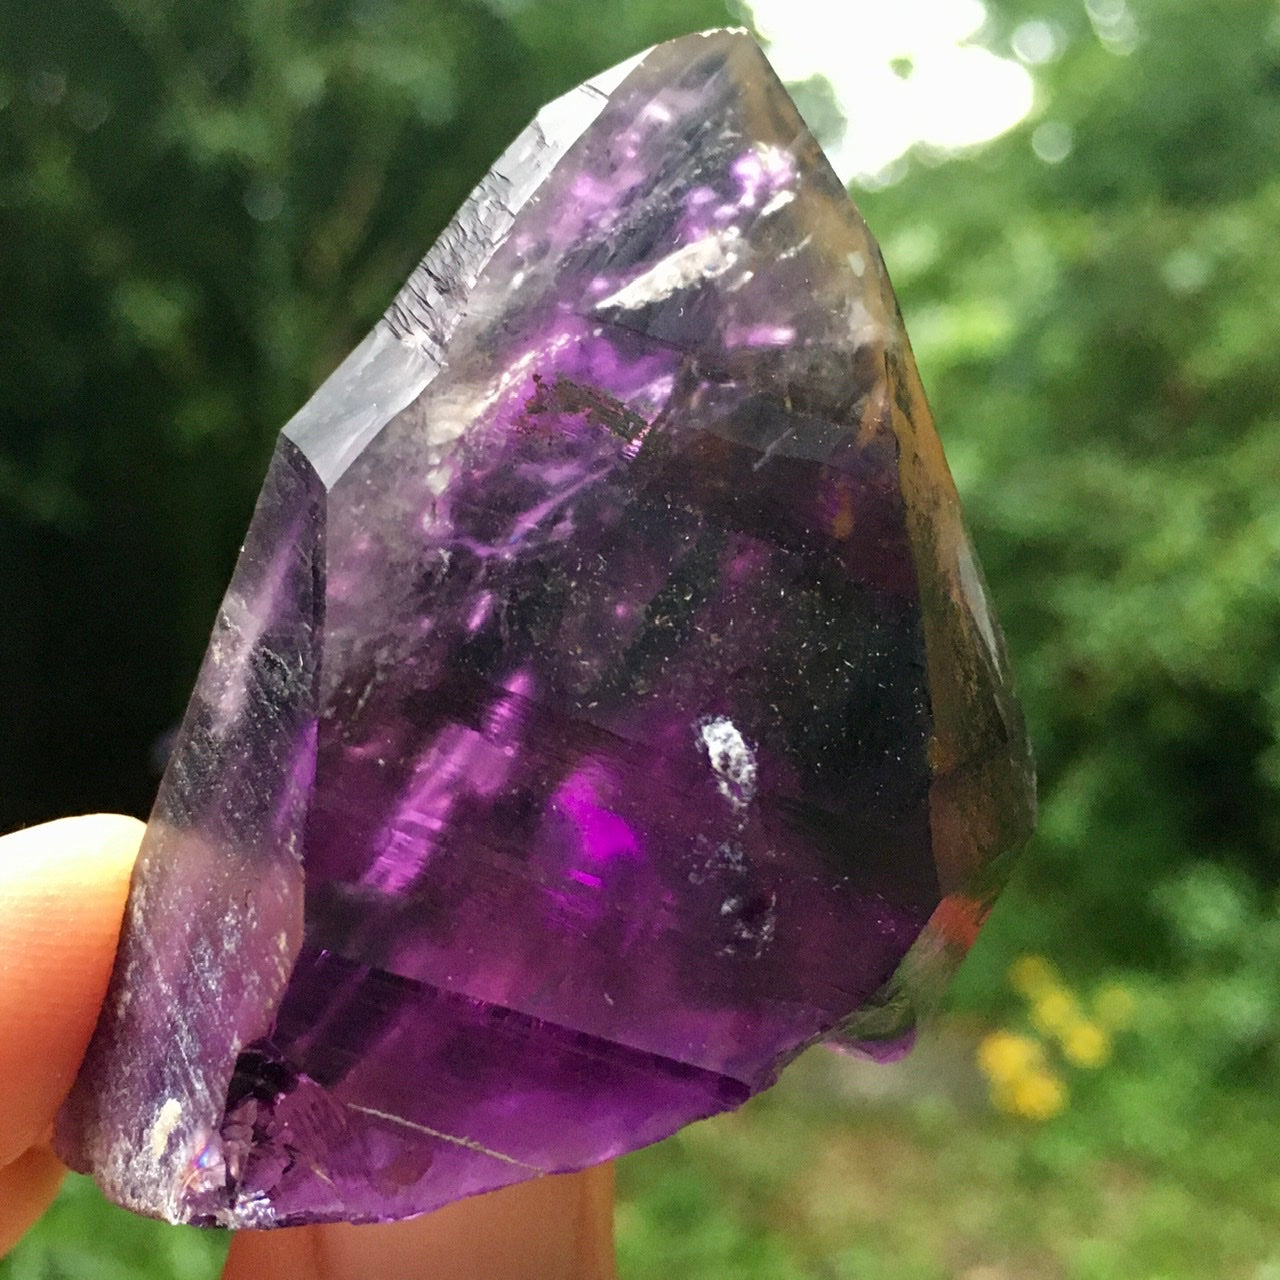 Amethyst Collection